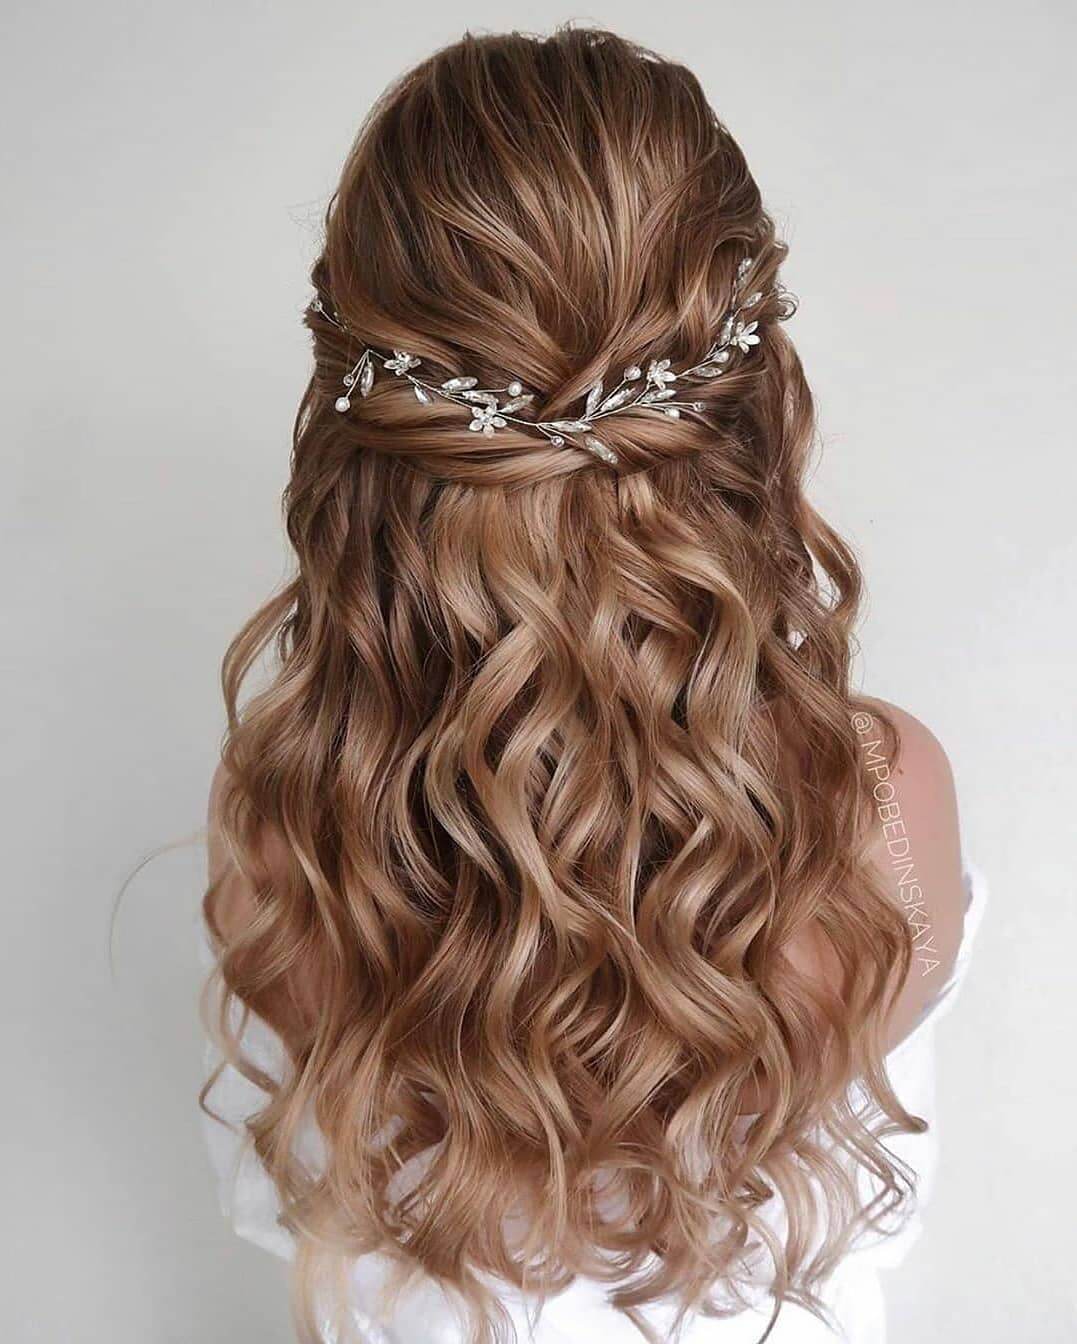 60 Cute Christmas Hairstyles For Long Hair To Try  Glaminaticom